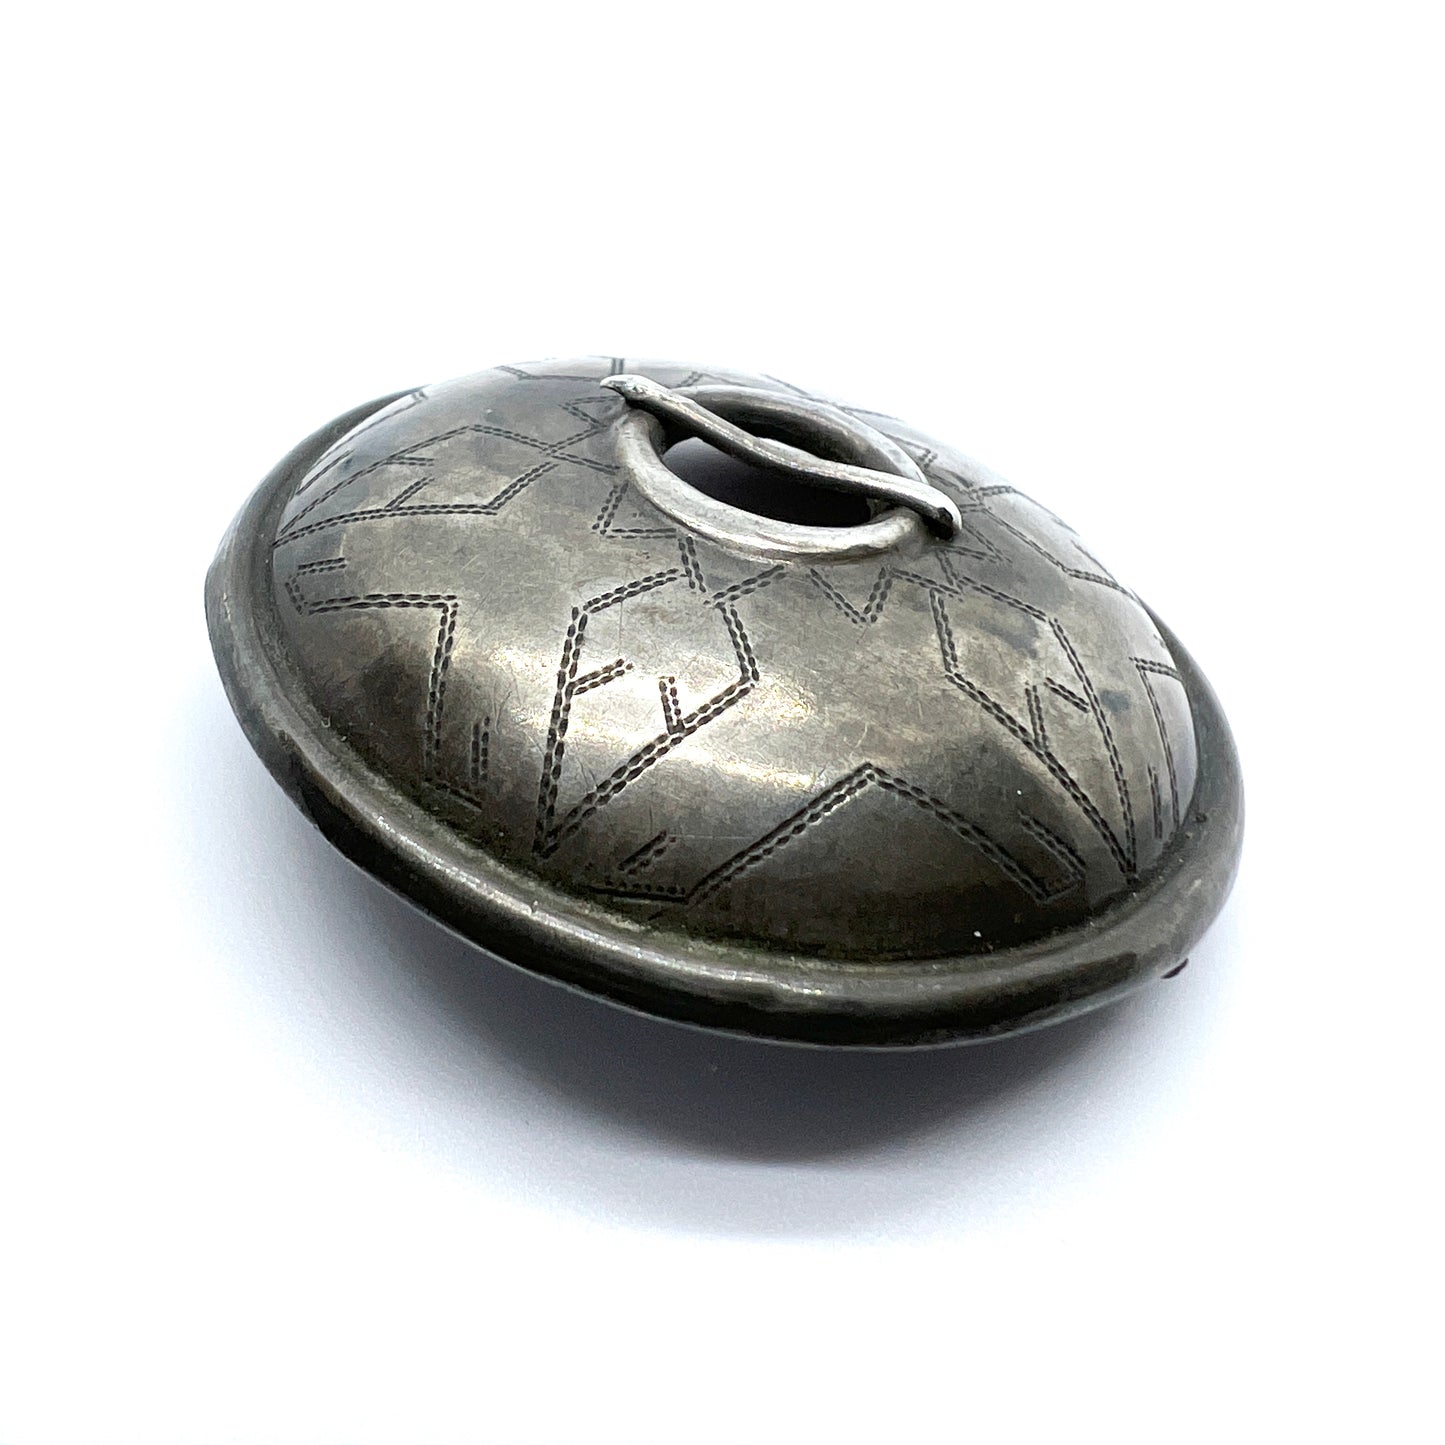 Kaarle August Wahlroos, Finland 1928. Traditional Solid Silver Shield Brooch.